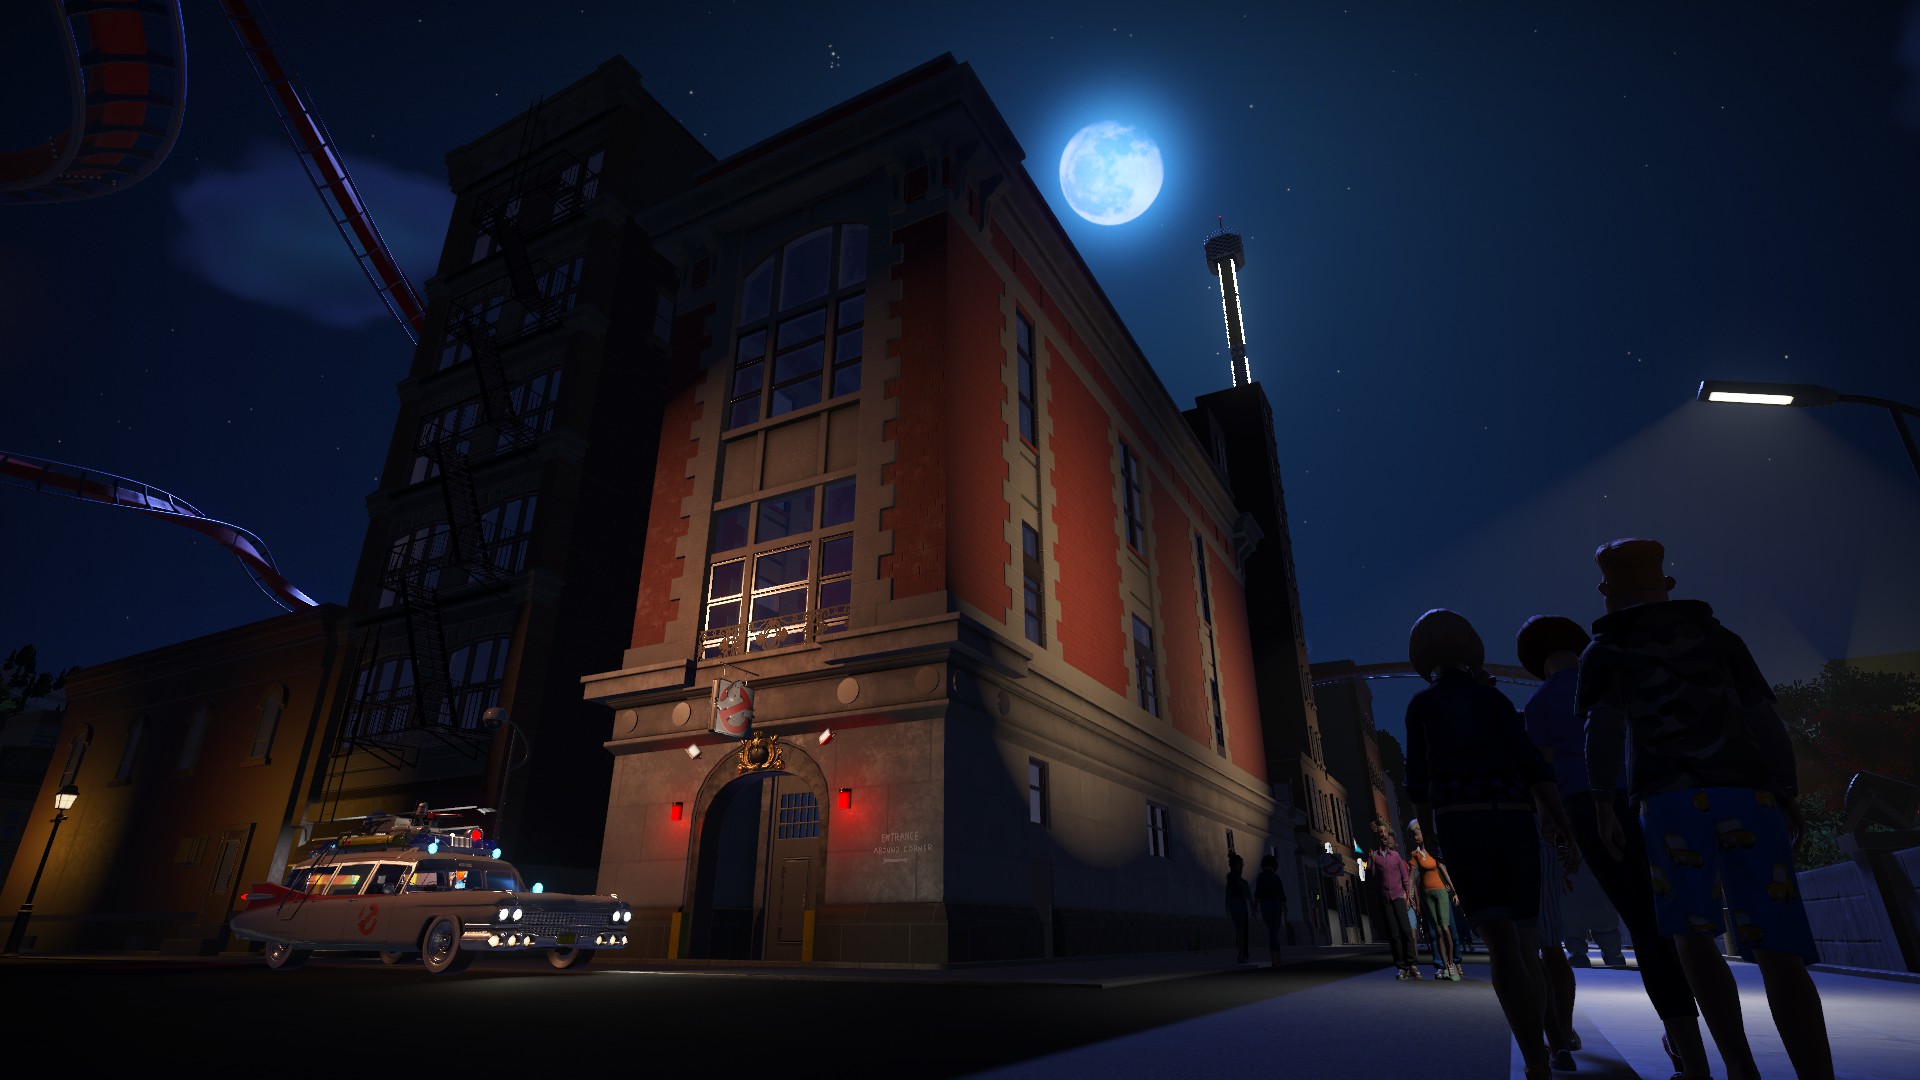 The Ghostbusters Firehouse in the moonlight